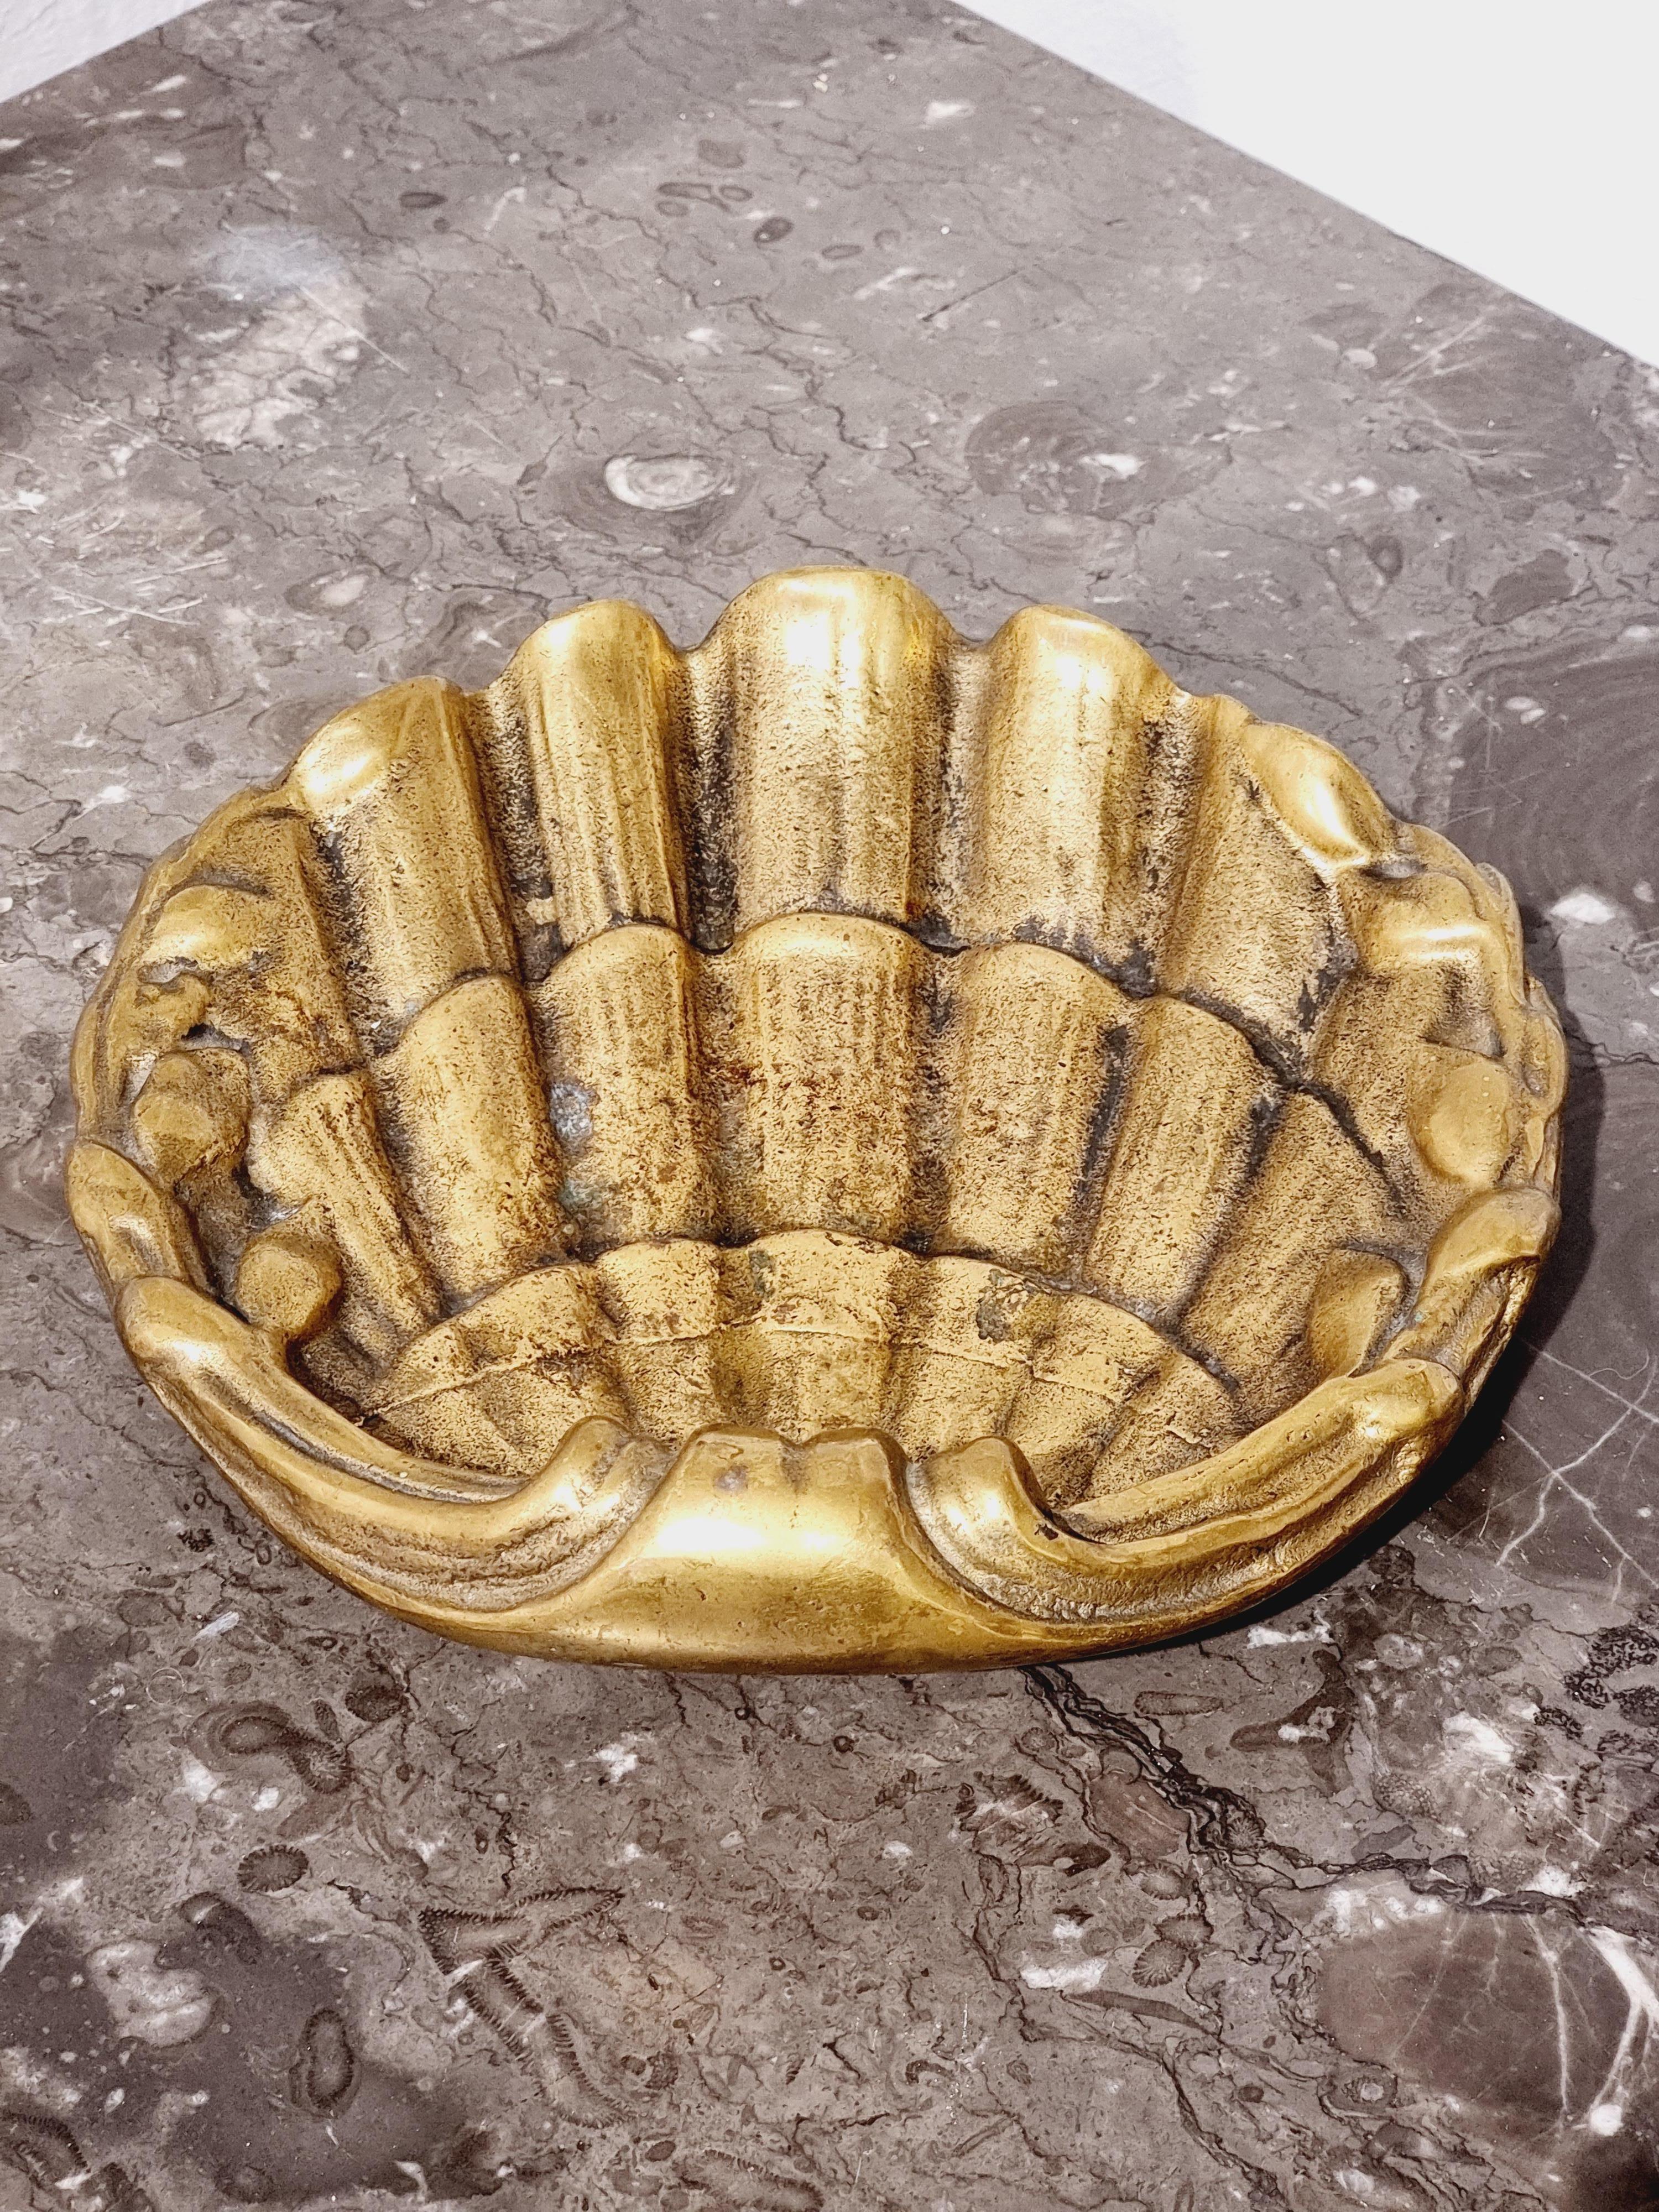 Bronze tray in shape of shell decorated with laurel leaves, french early 1900s. 

Beautiful patina, heavy quality metal. In good condition. 